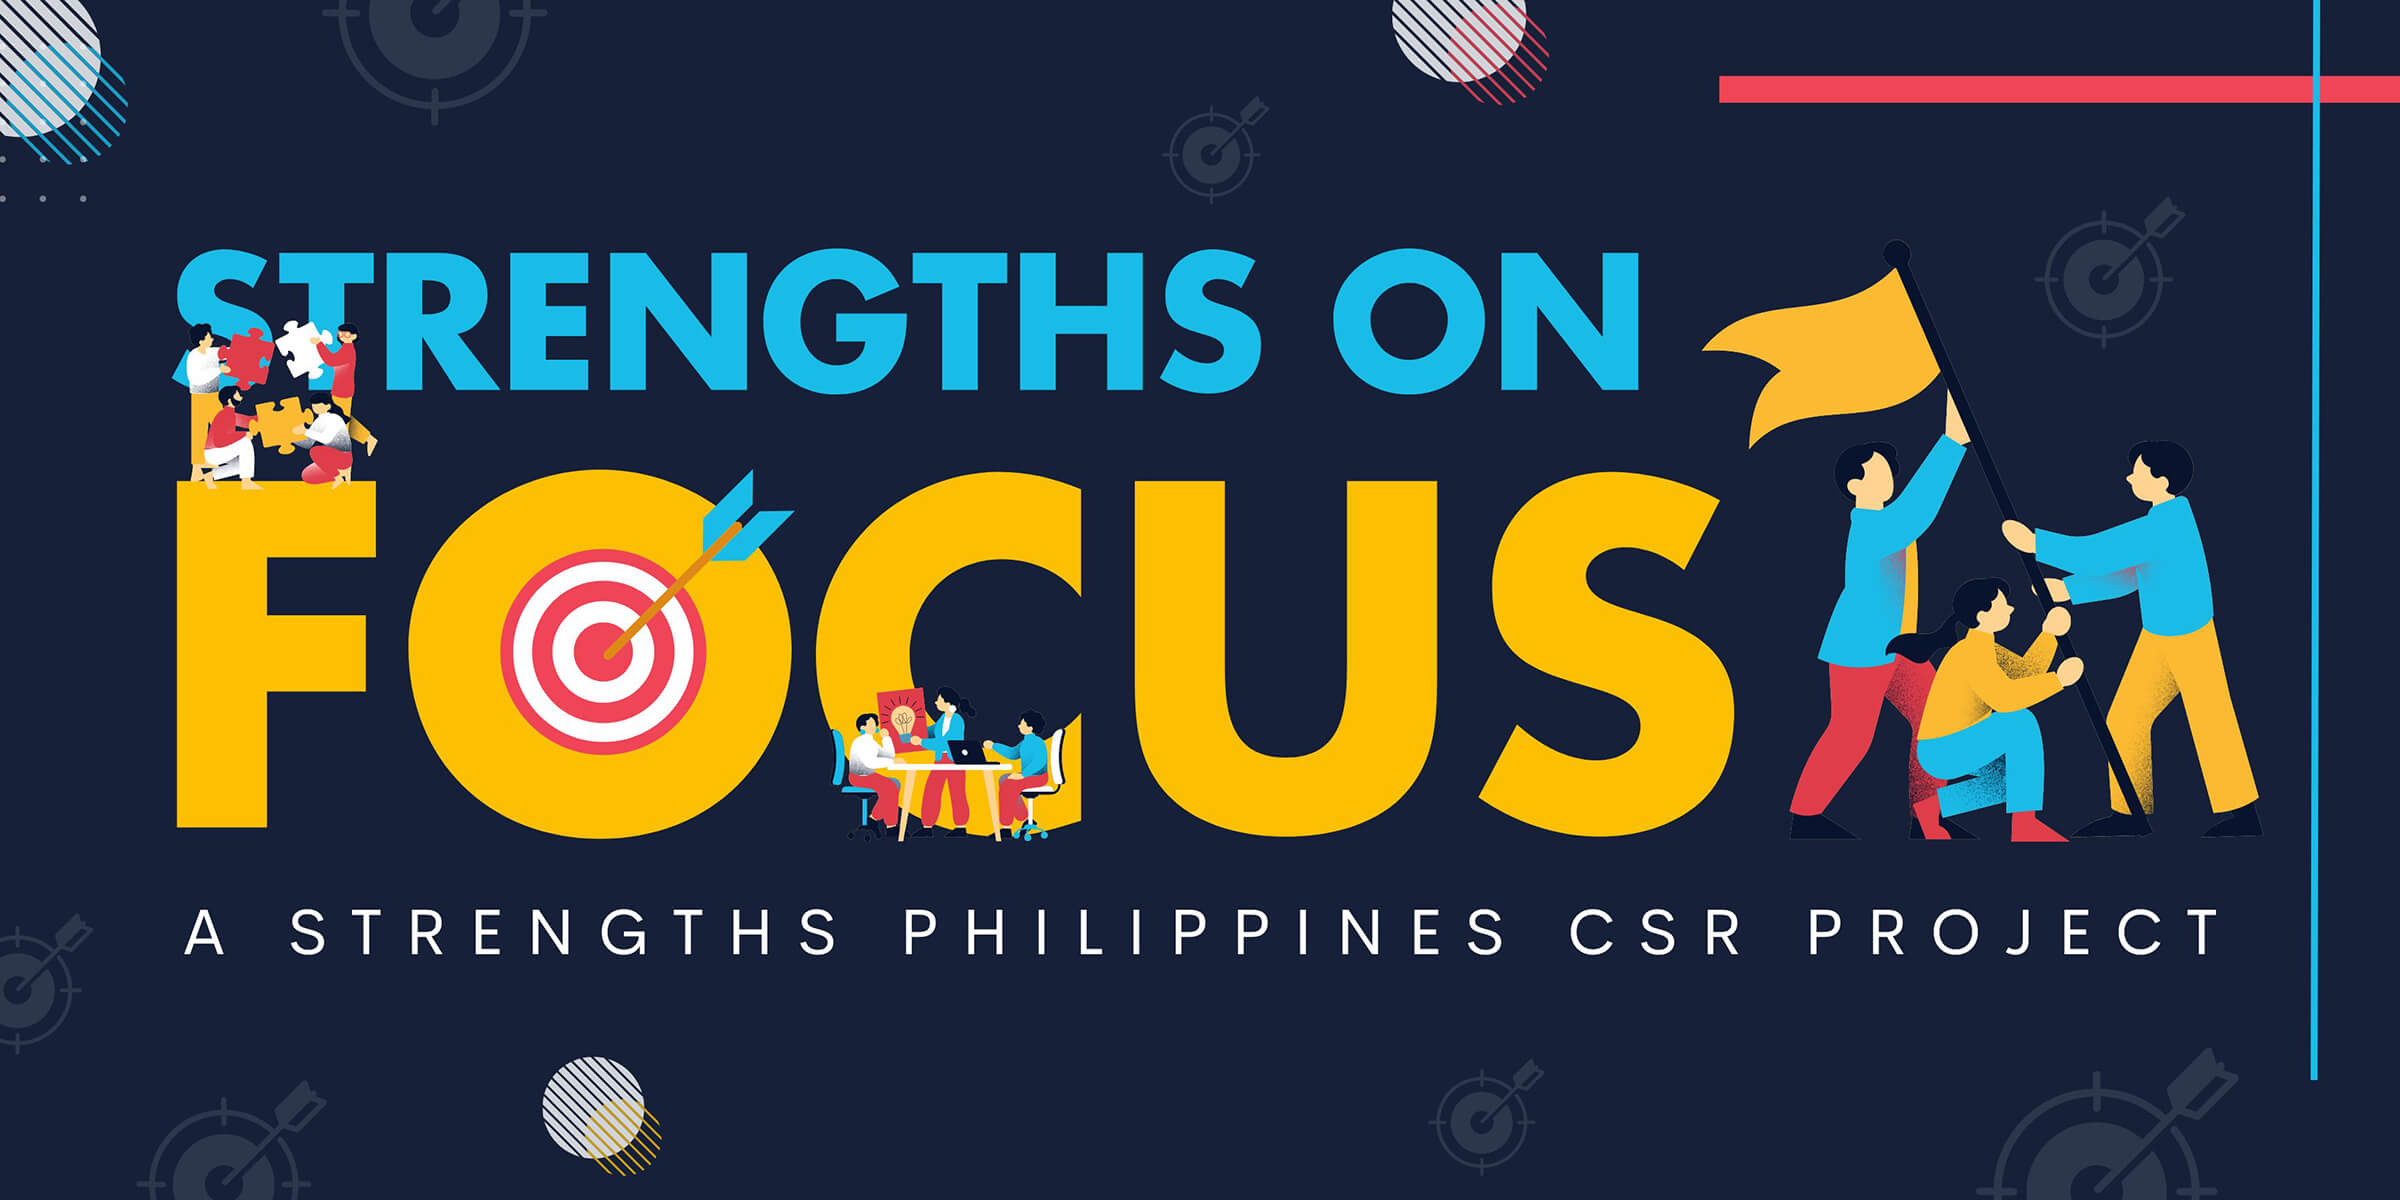 Strengths-on-Focus-A-Strengths-Philippines-CSR-Project (Compressed)